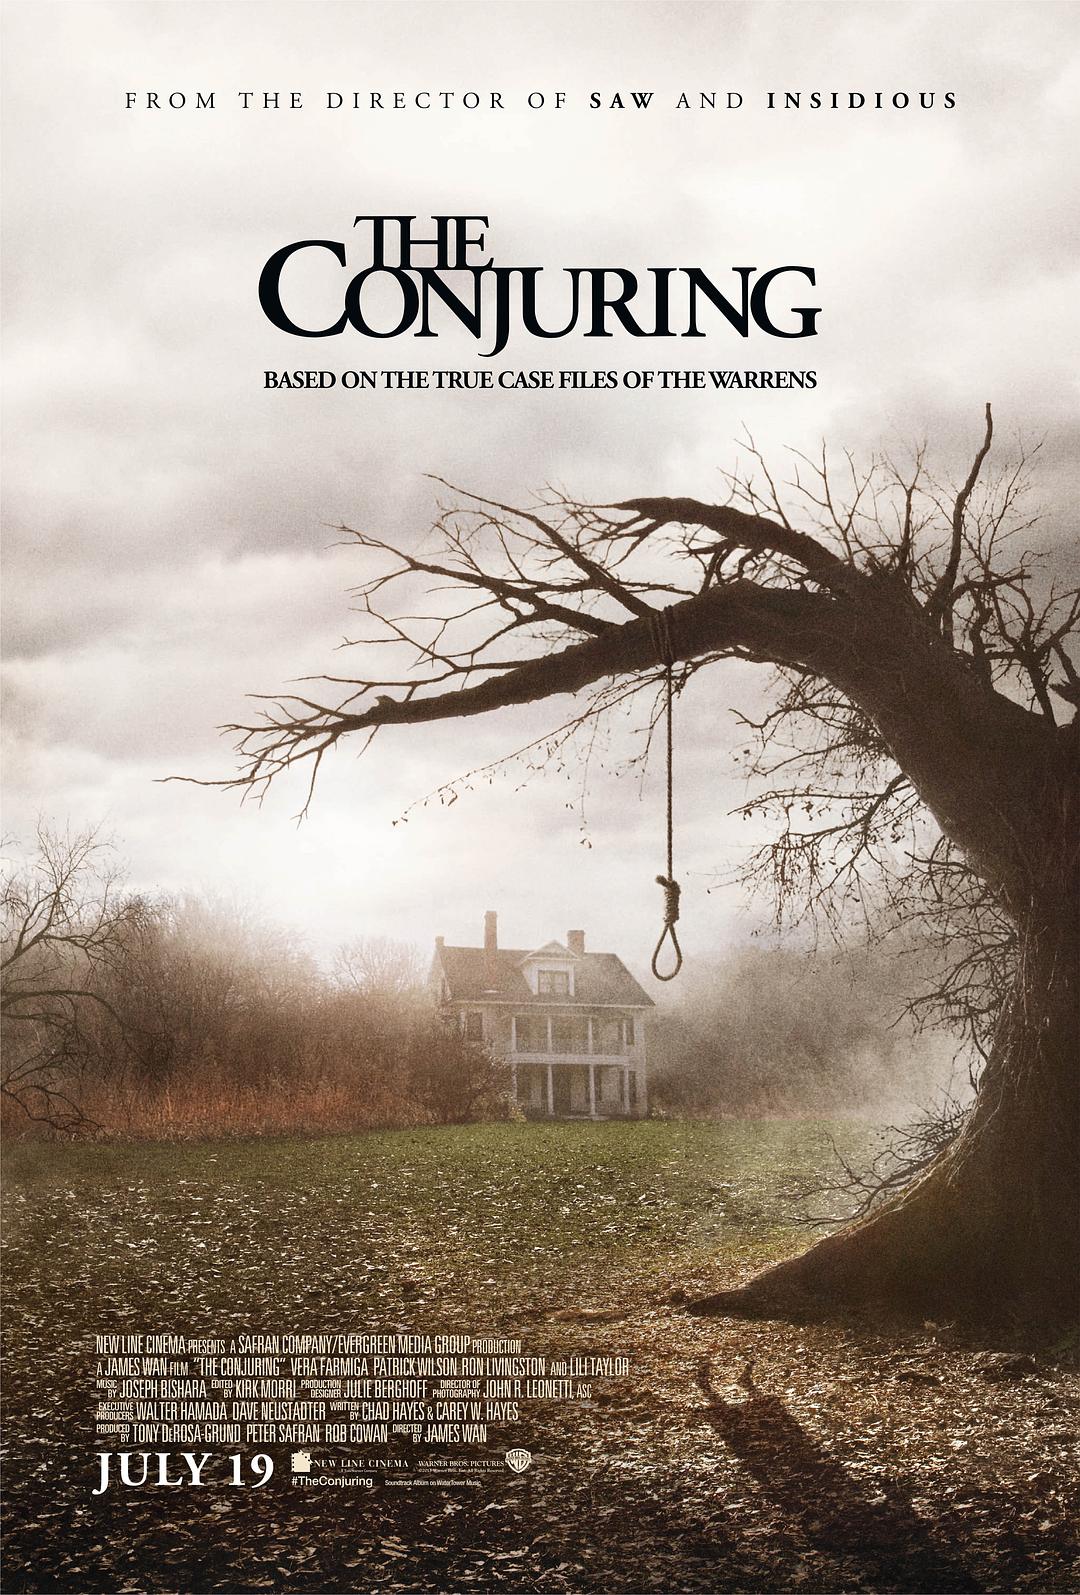 л The.Conjuring.2013.1080p.BluRay.x264-ALLiANCE 7.65GB-1.png